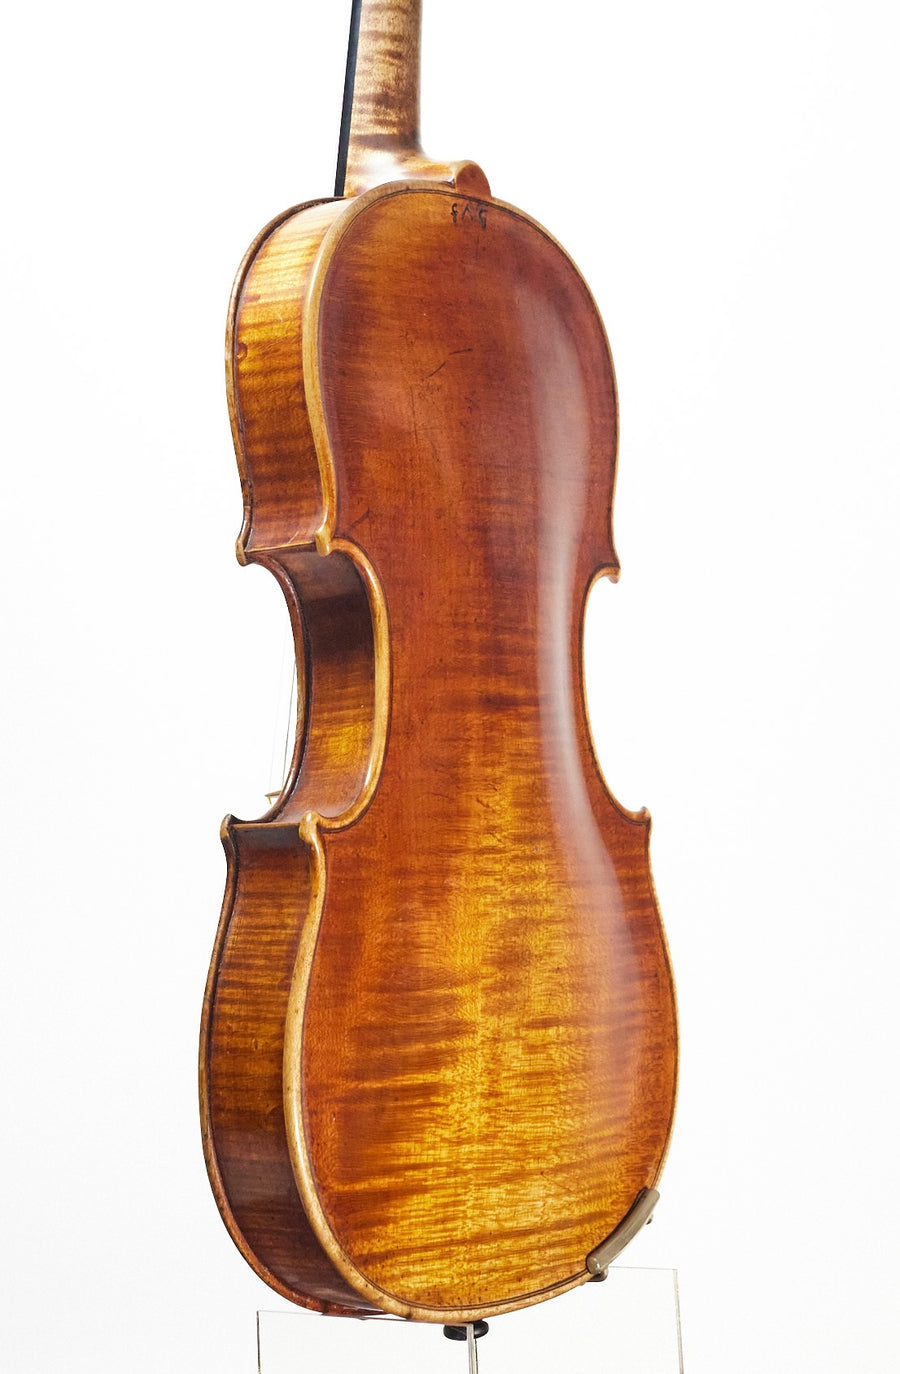 An Early 19th Century German Violin By Friedrich August Glass.